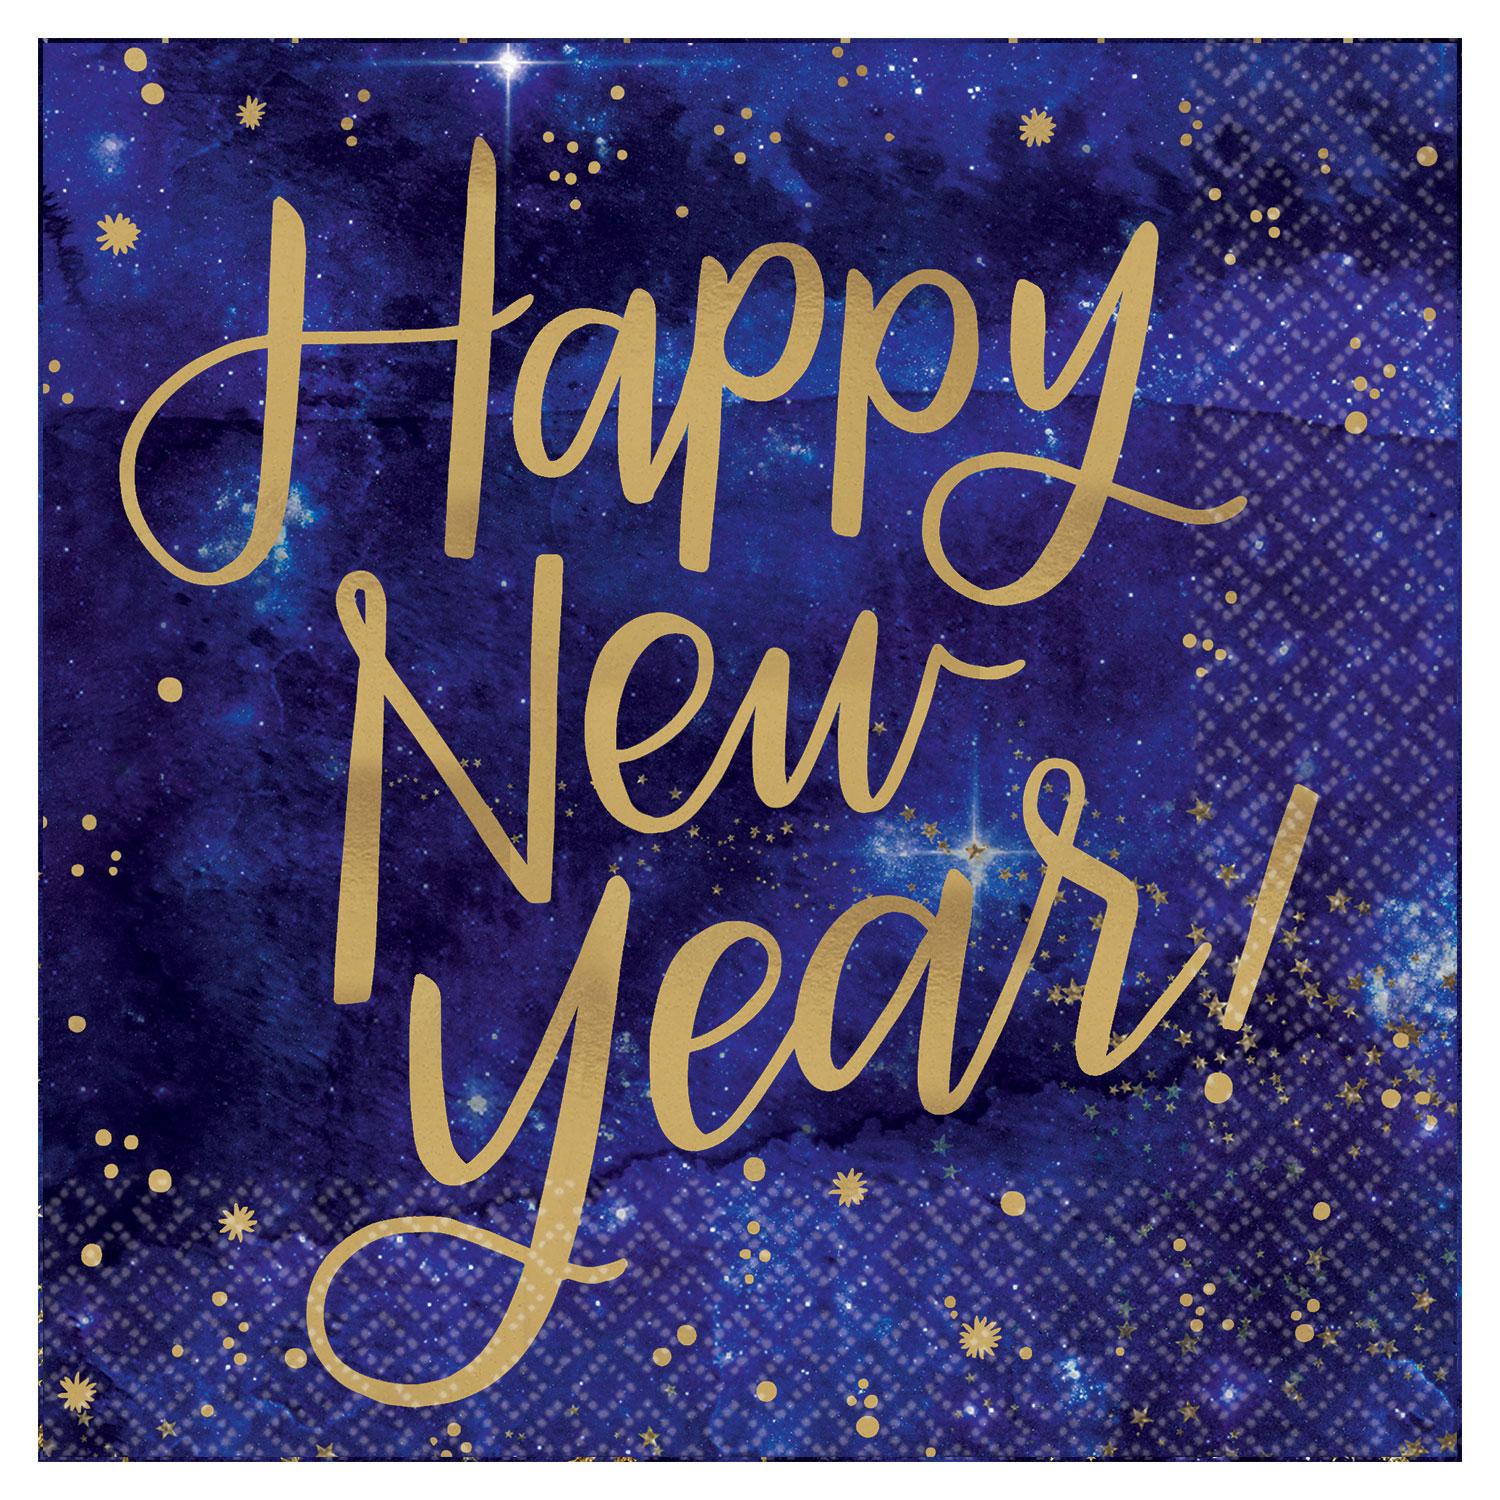 Happy New Year Midnight NYE Hot Stamped Beverage Napkins 25cm pk16 by Amscan 502207 available here at Karnival Costumes online party shop